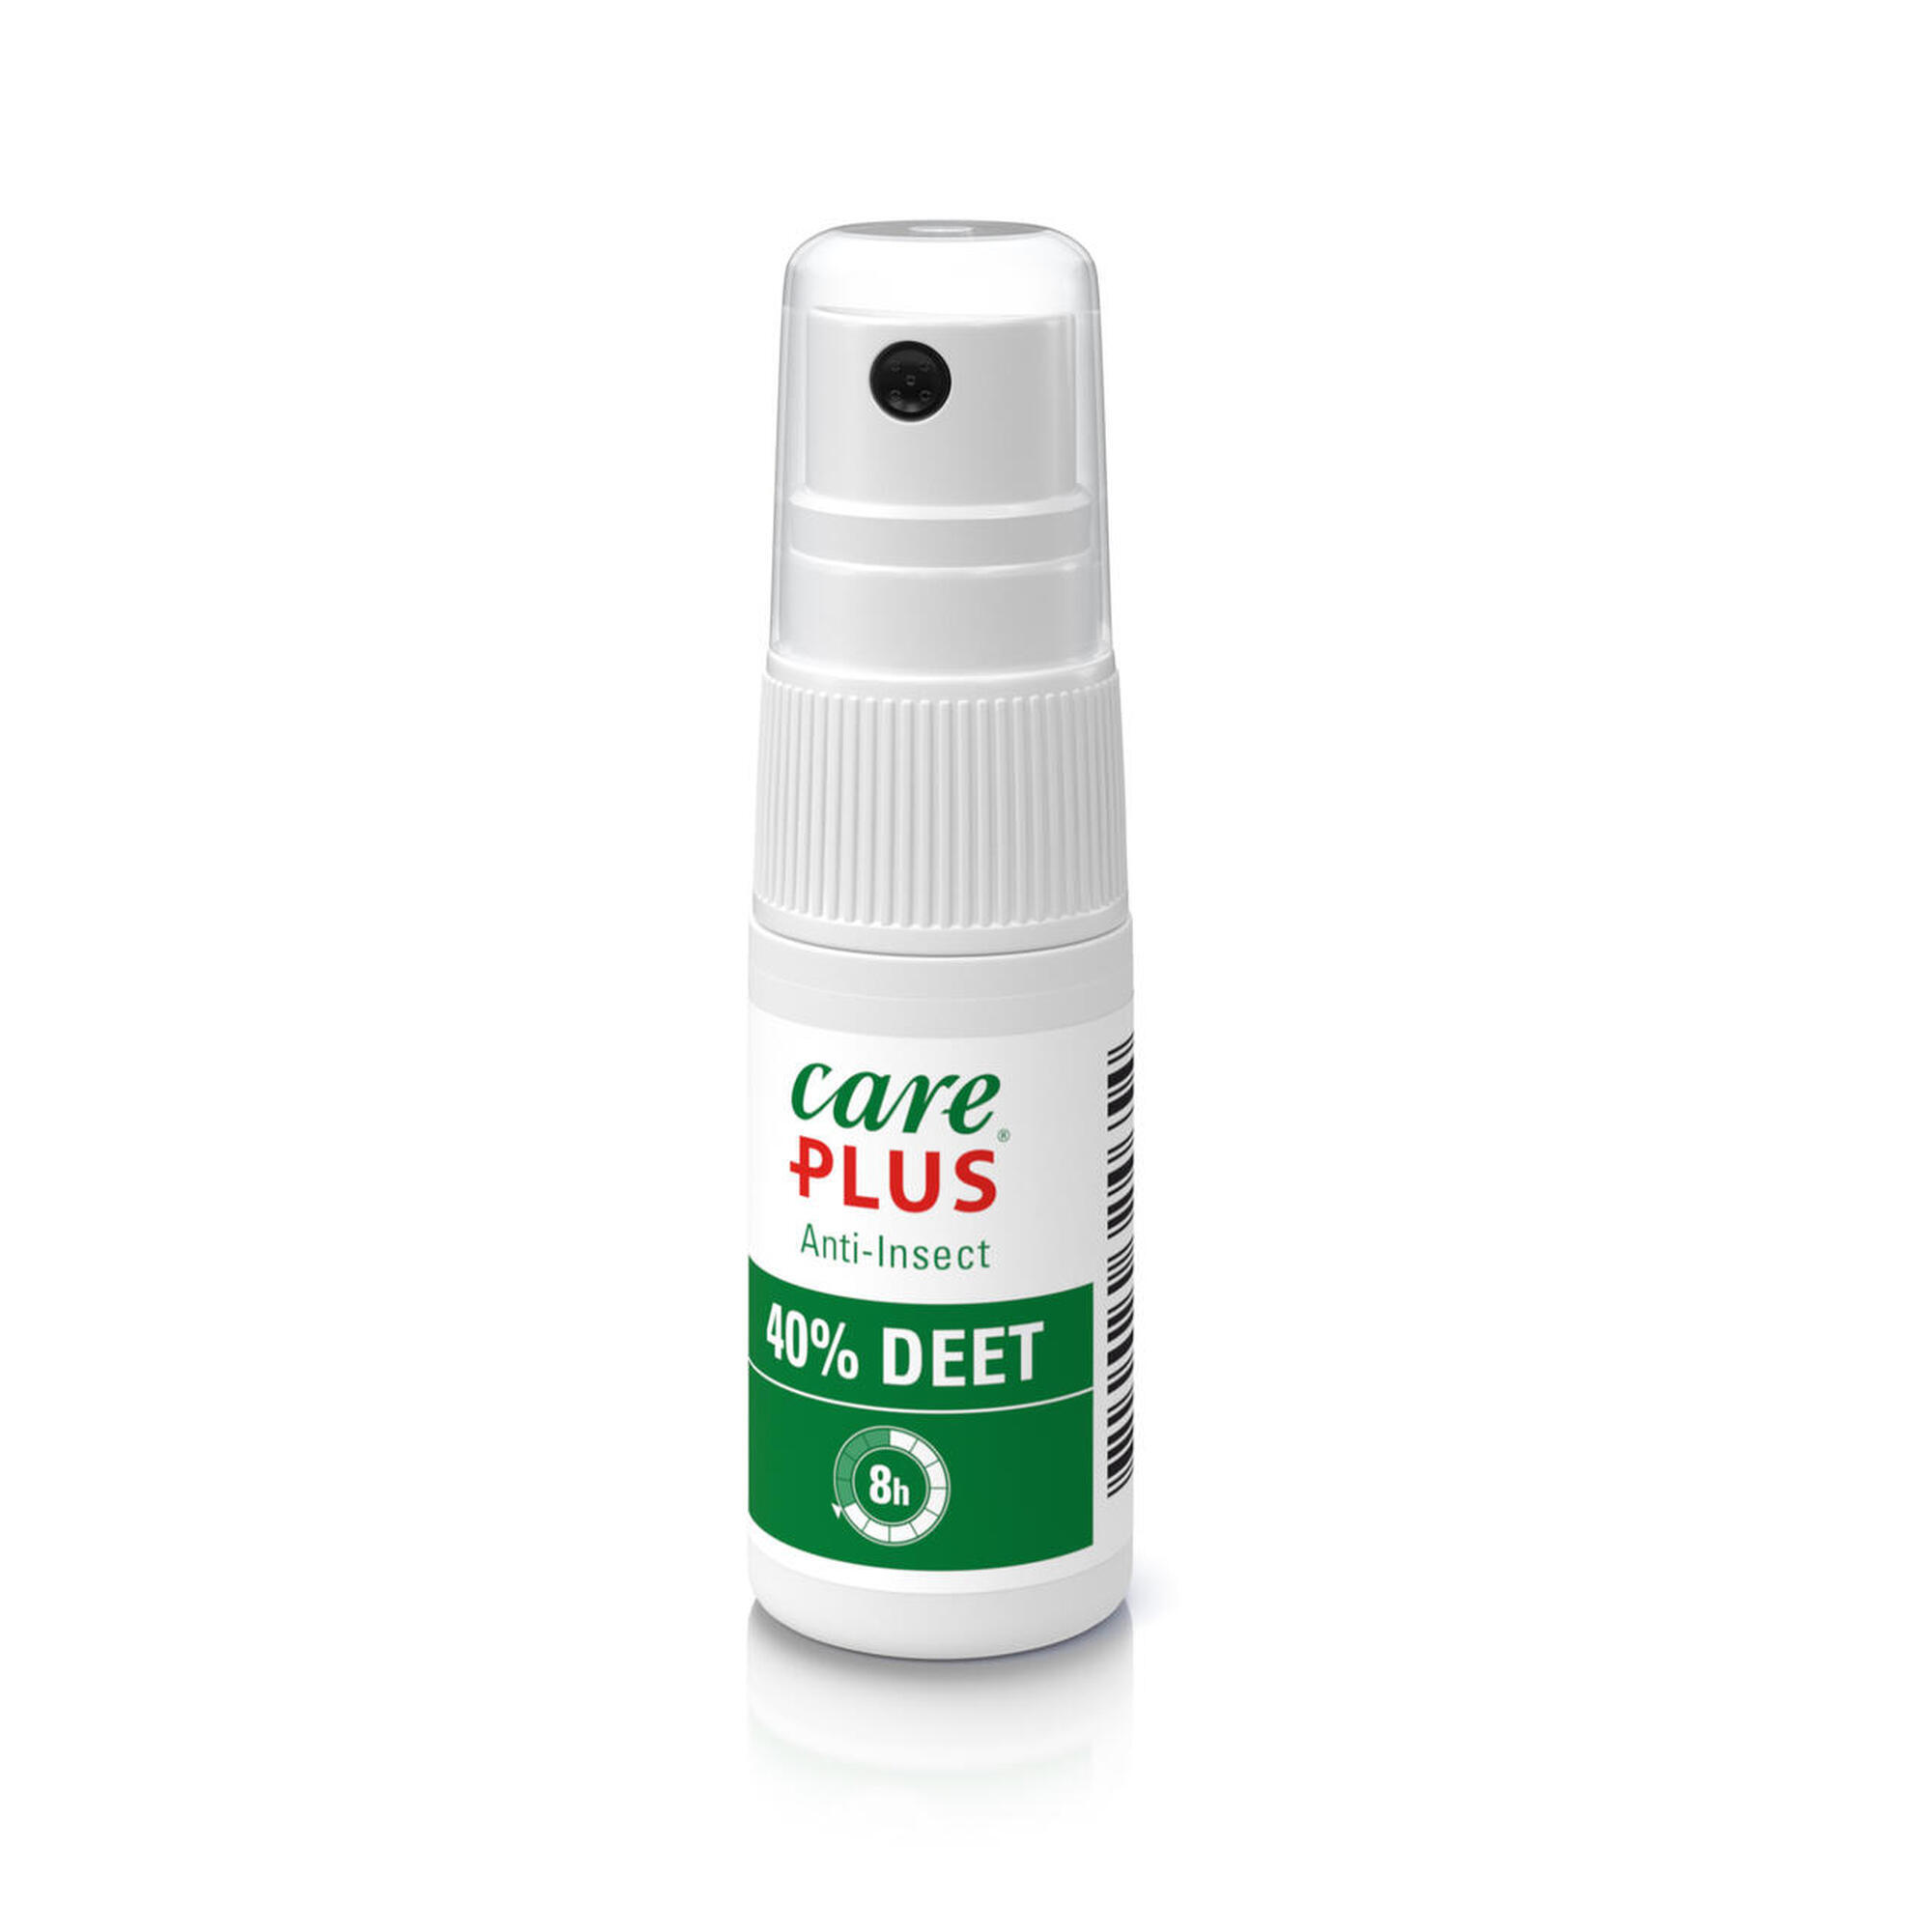 Care Plus Anti-Insect Deet 40% spray 15 ml